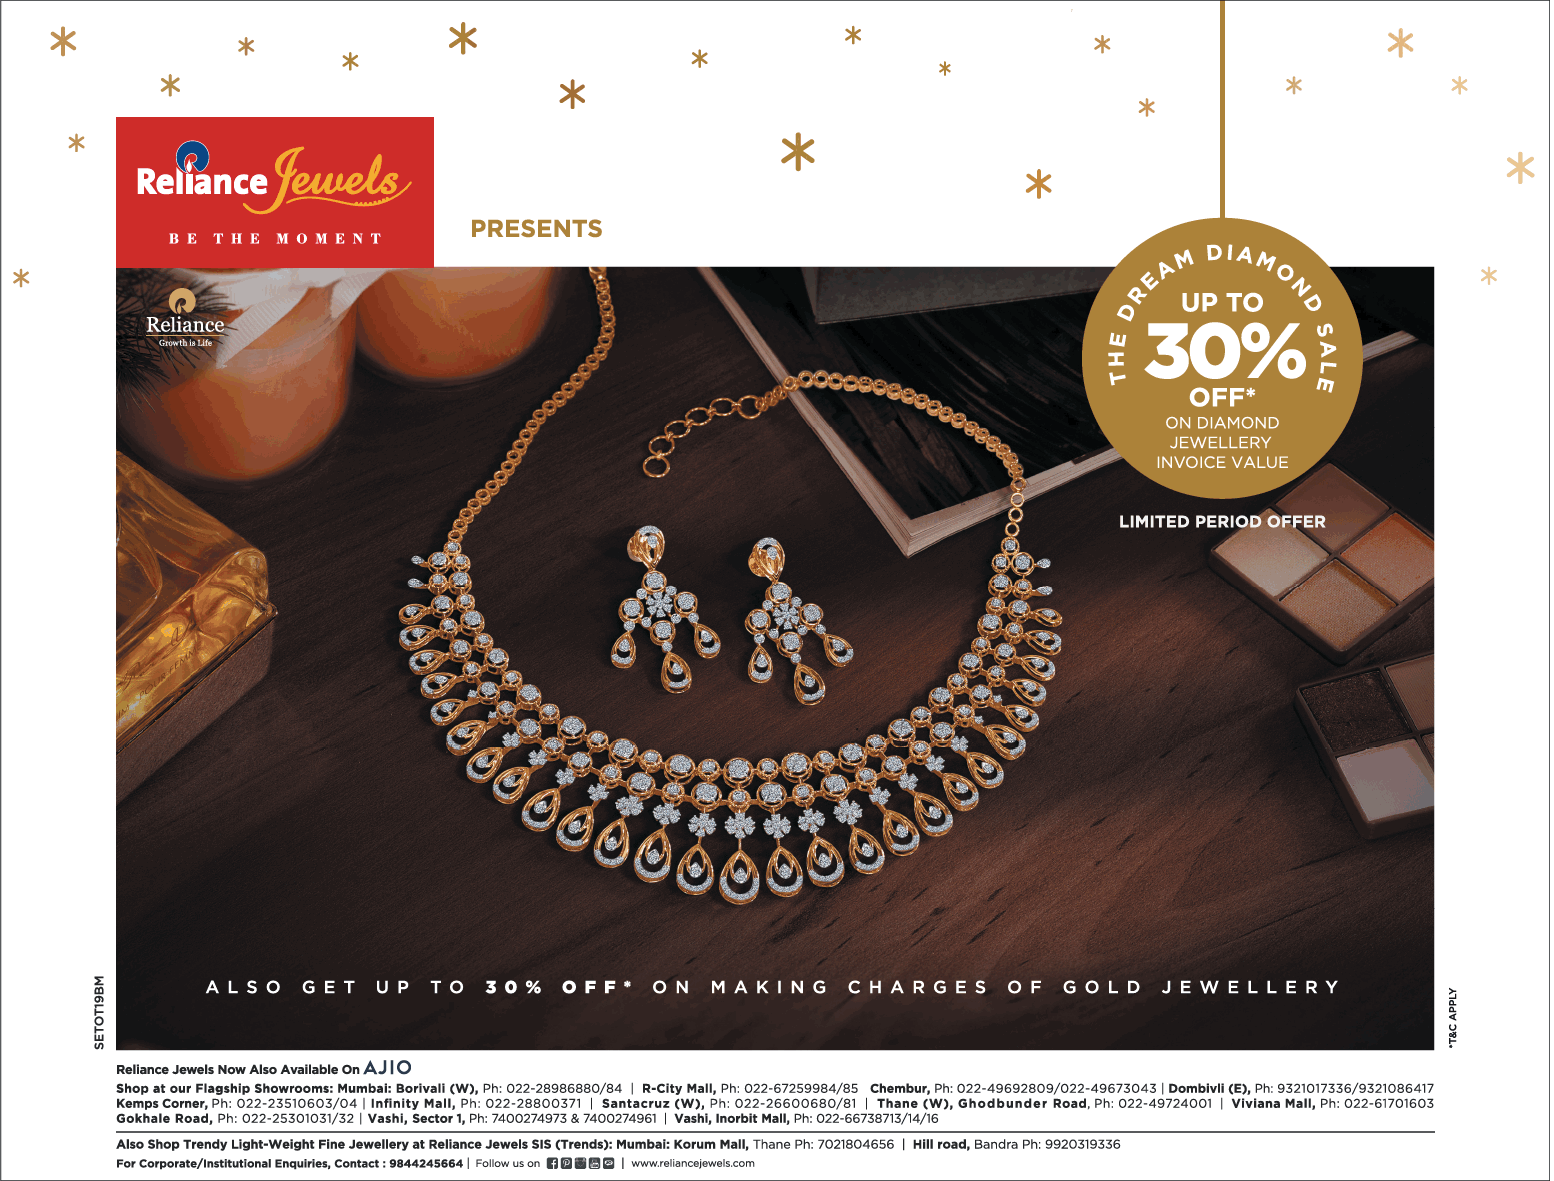 reliance-jewels-the-dream-diamond-sale-up-to-30%-off-ad-bombay-times-23-01-2021